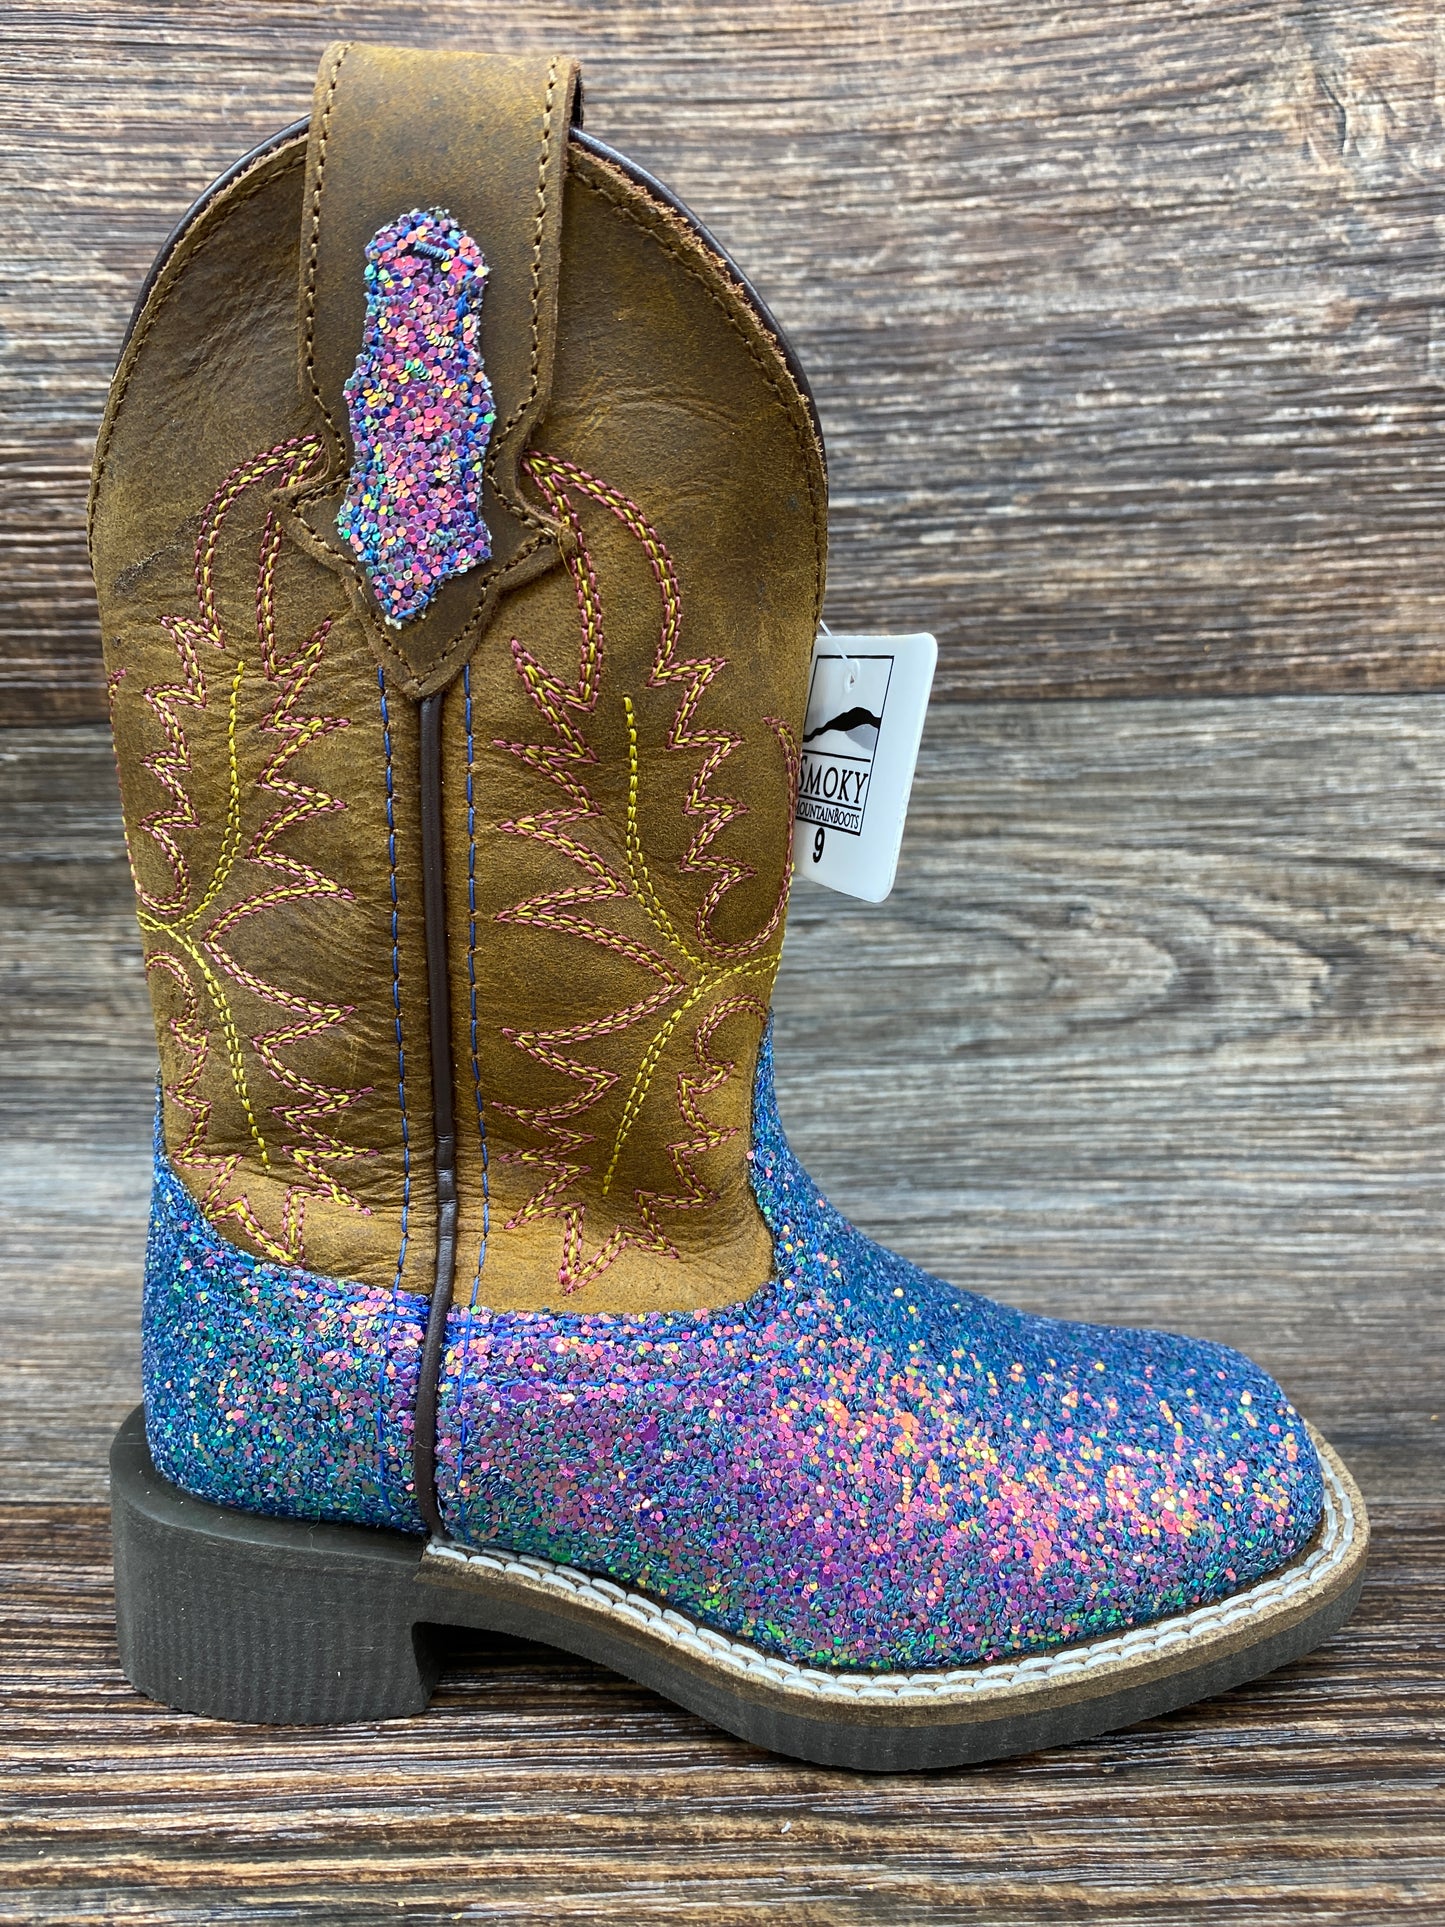 3077c Kid's Pastel Glitter Square Toe Western Boots by Smoky Mountain - 3077C Children's Sizes 8.5-3